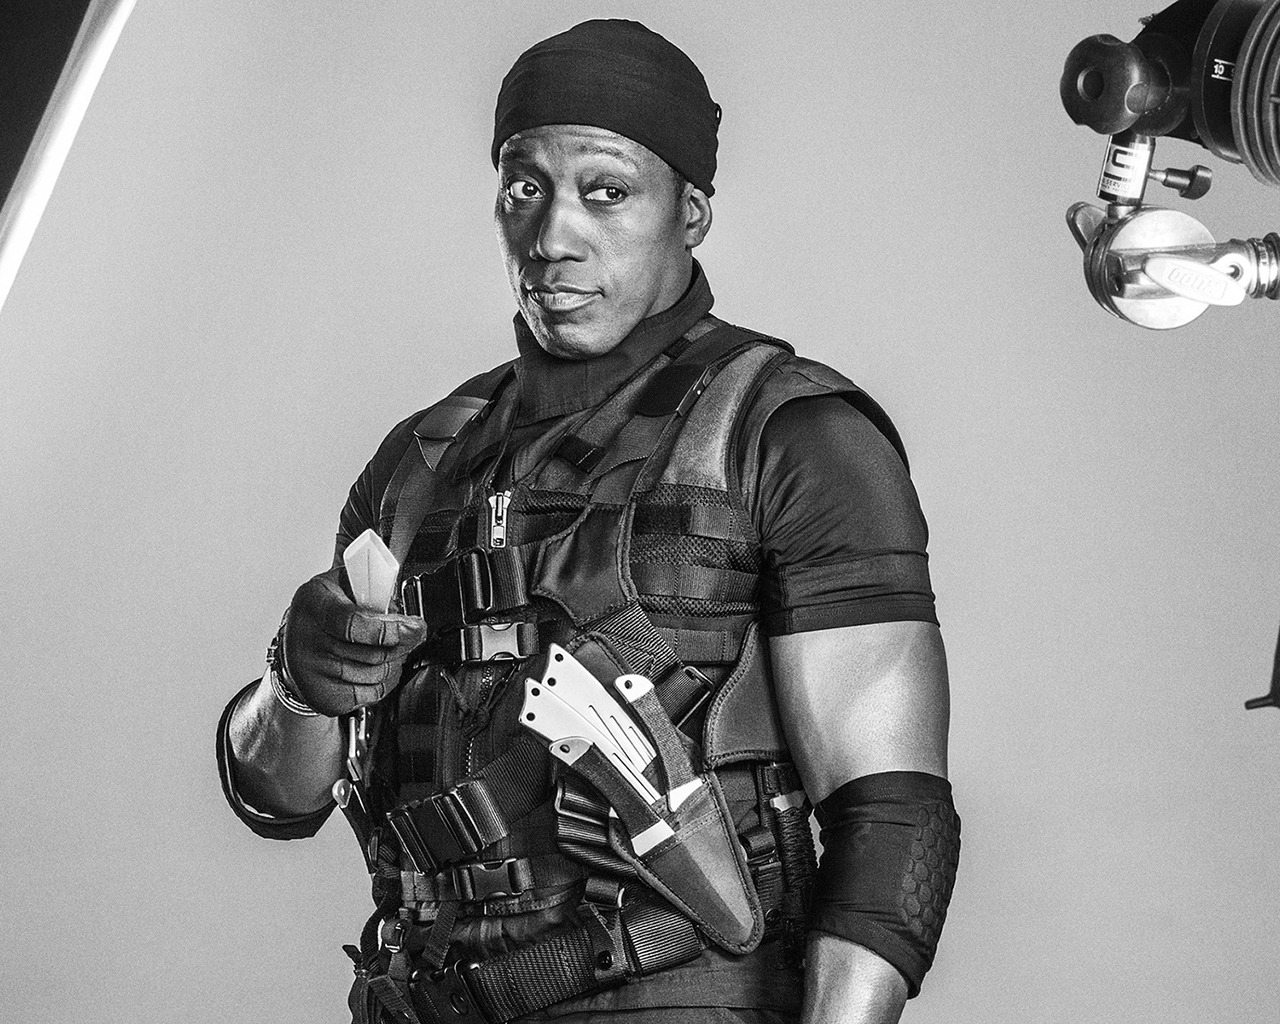 Wesley Snipes The Expendables 3 for 1280 x 1024 resolution